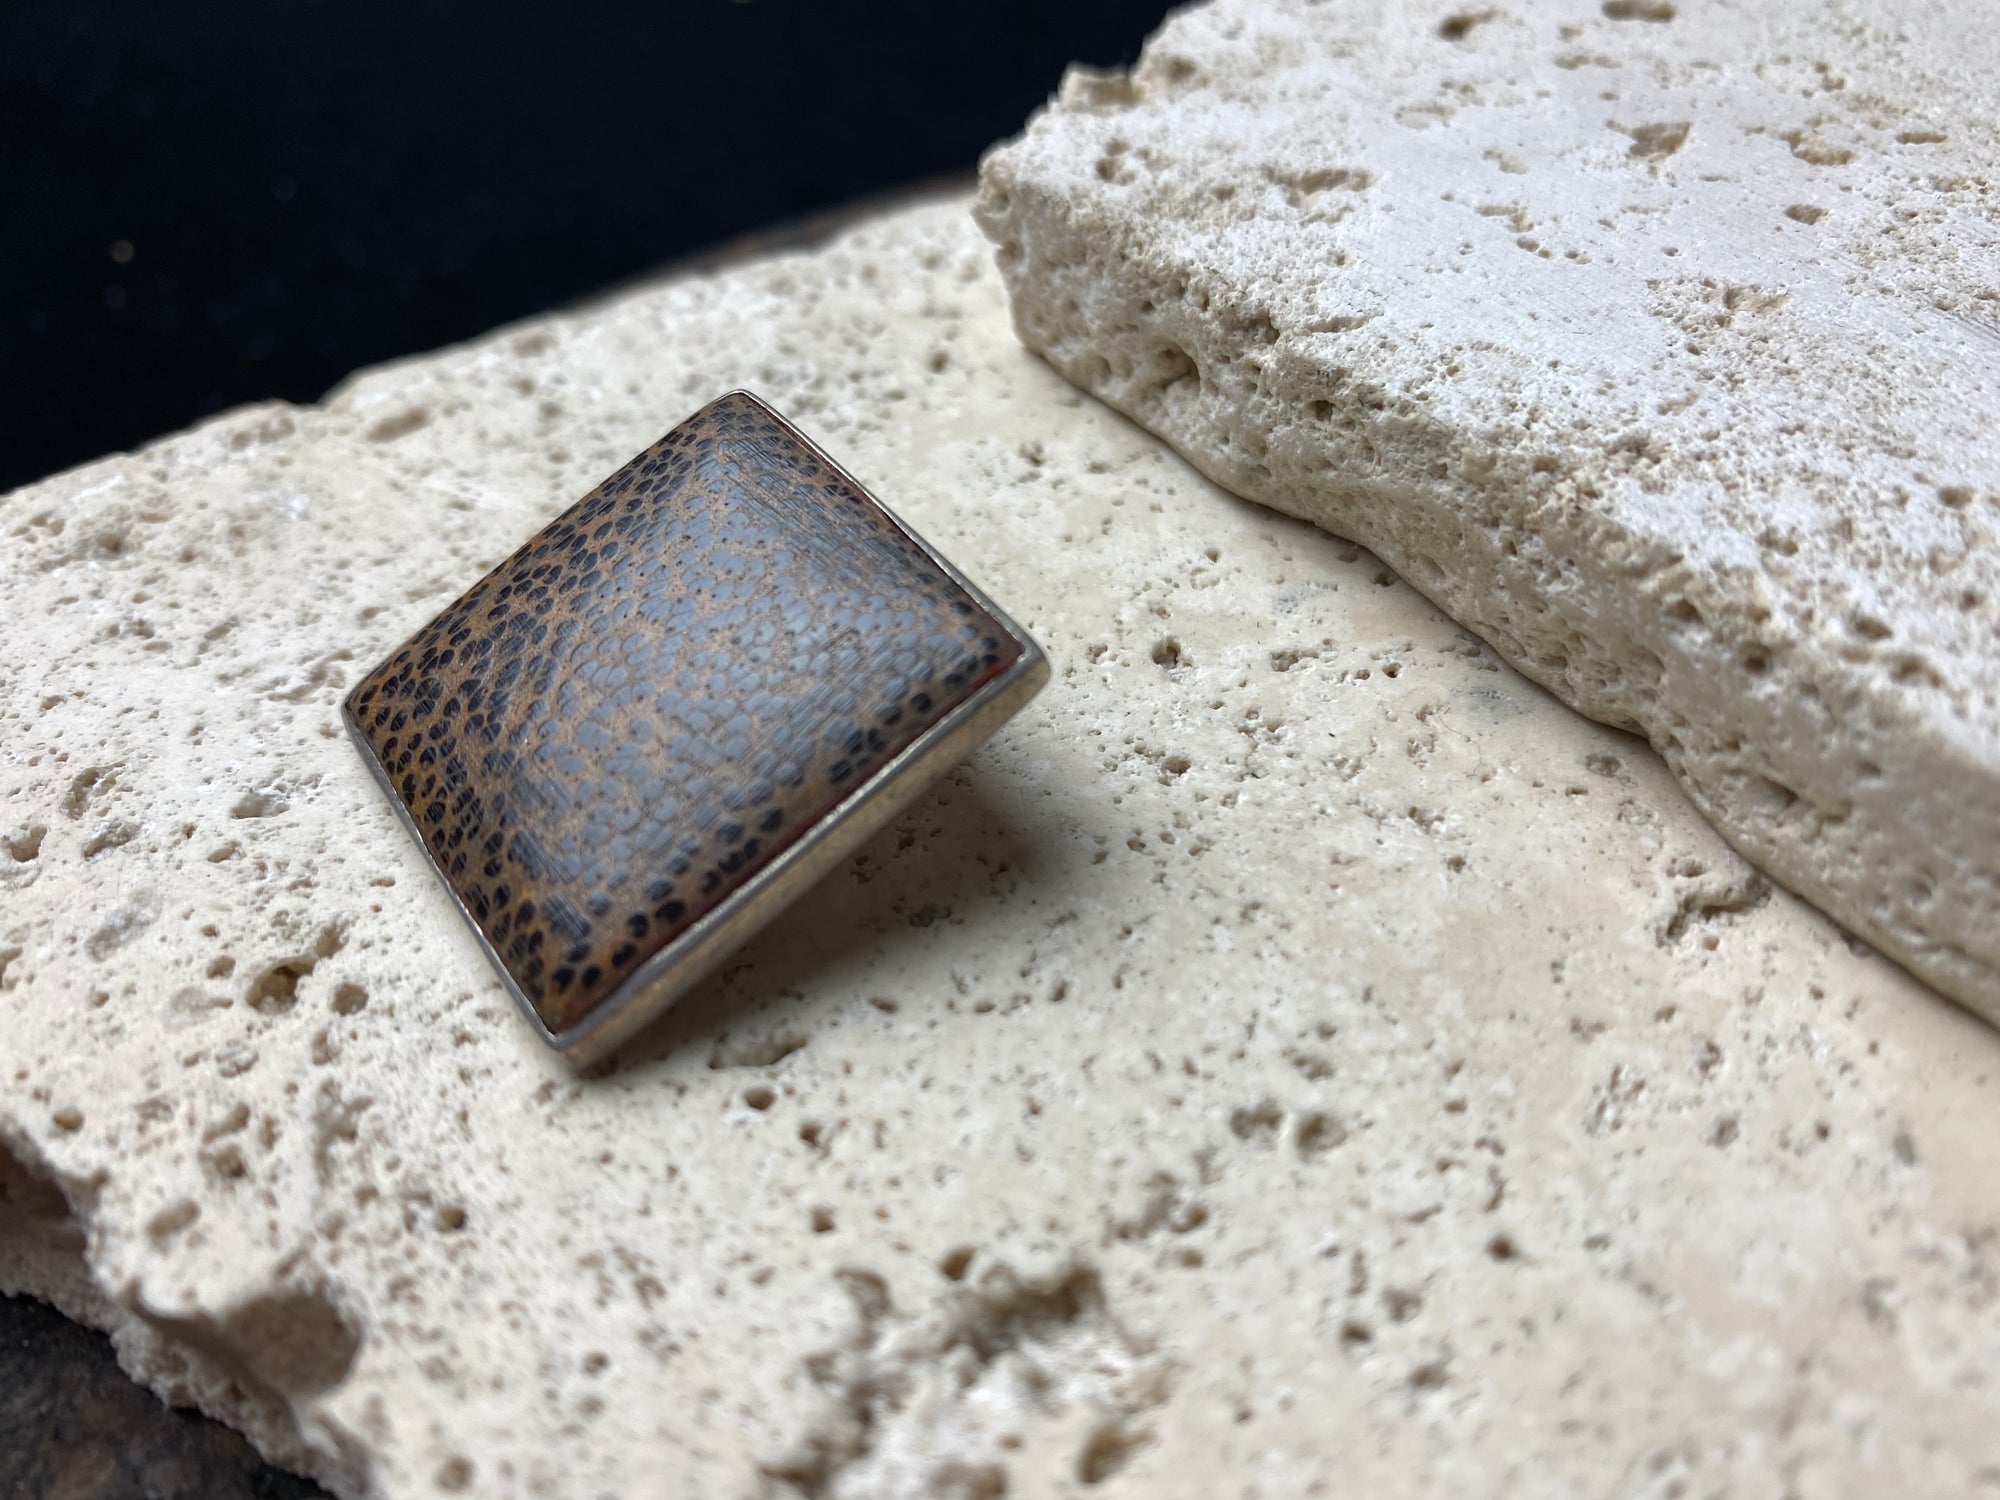 Coconut wood and sterling silver backed square pendant, with a large and generously sized bail that can take not only chains, but cords or leather as well. Can be worn by either men or women.